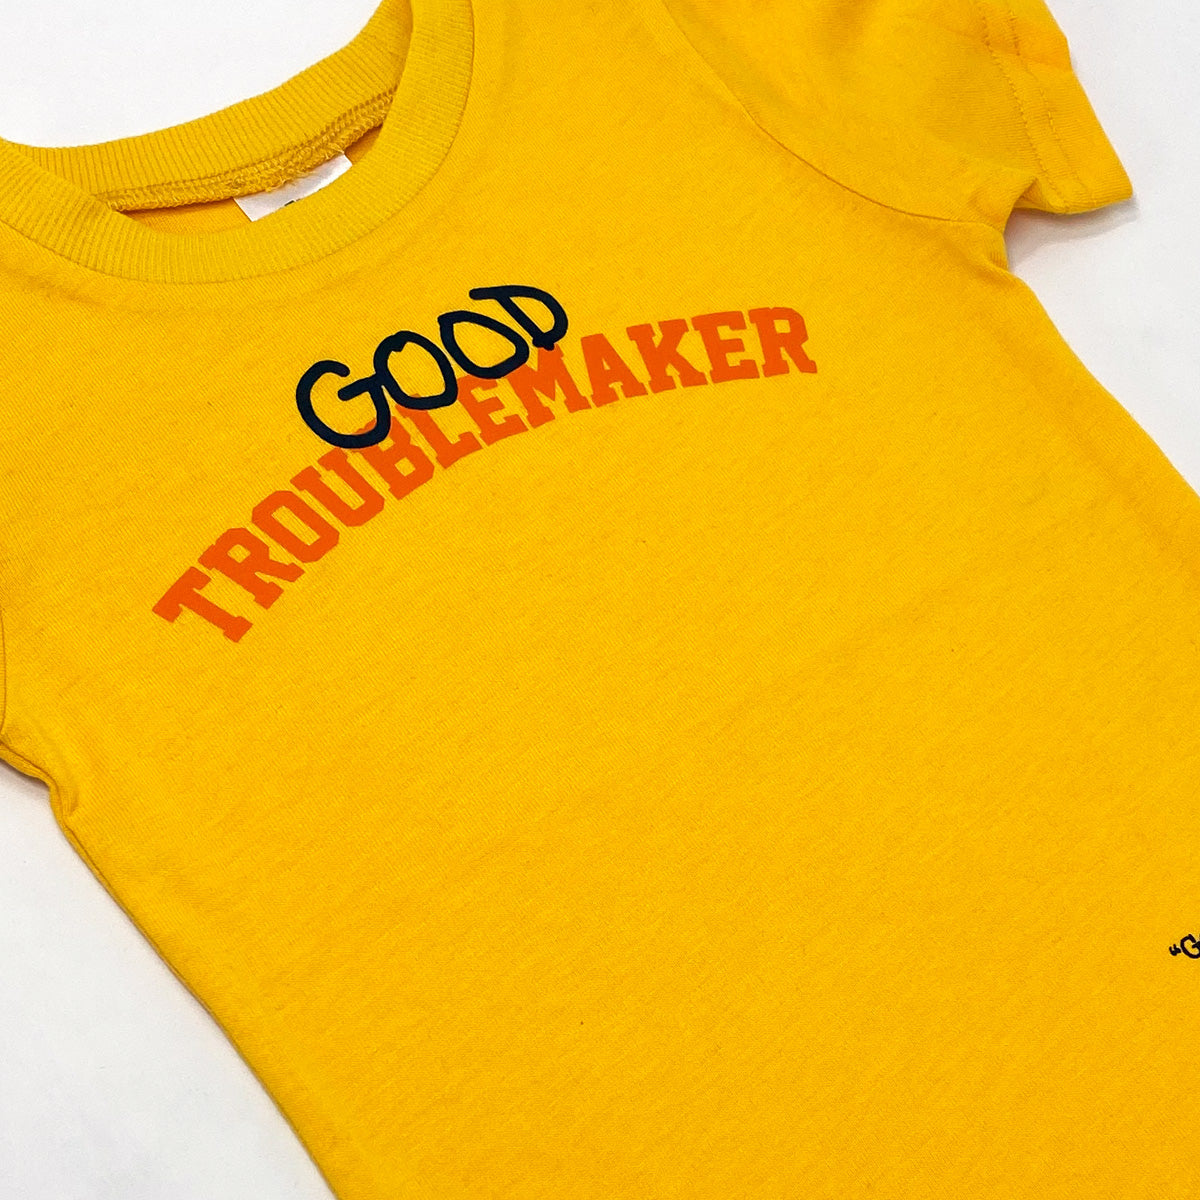 Troublemaker T-Shirt (Yellow)